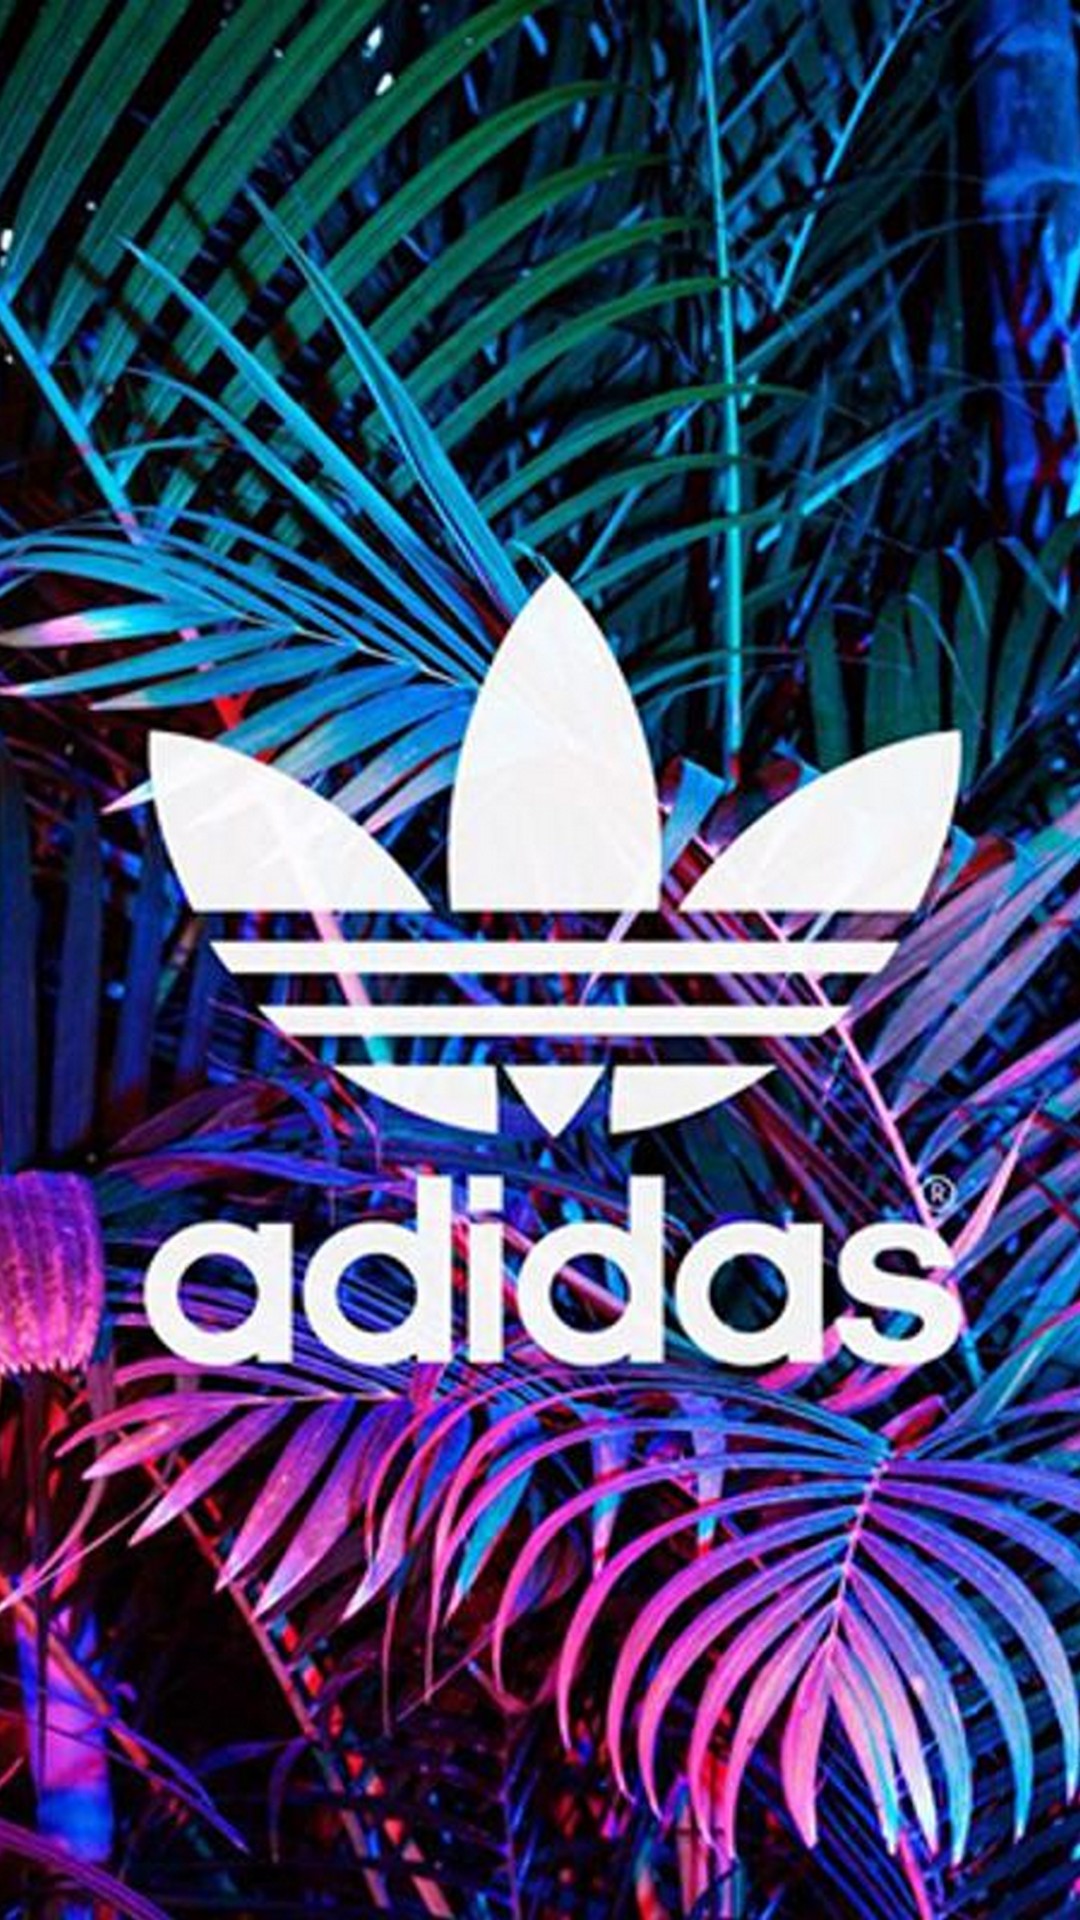 Adidas Backgrounds For Android - 2020